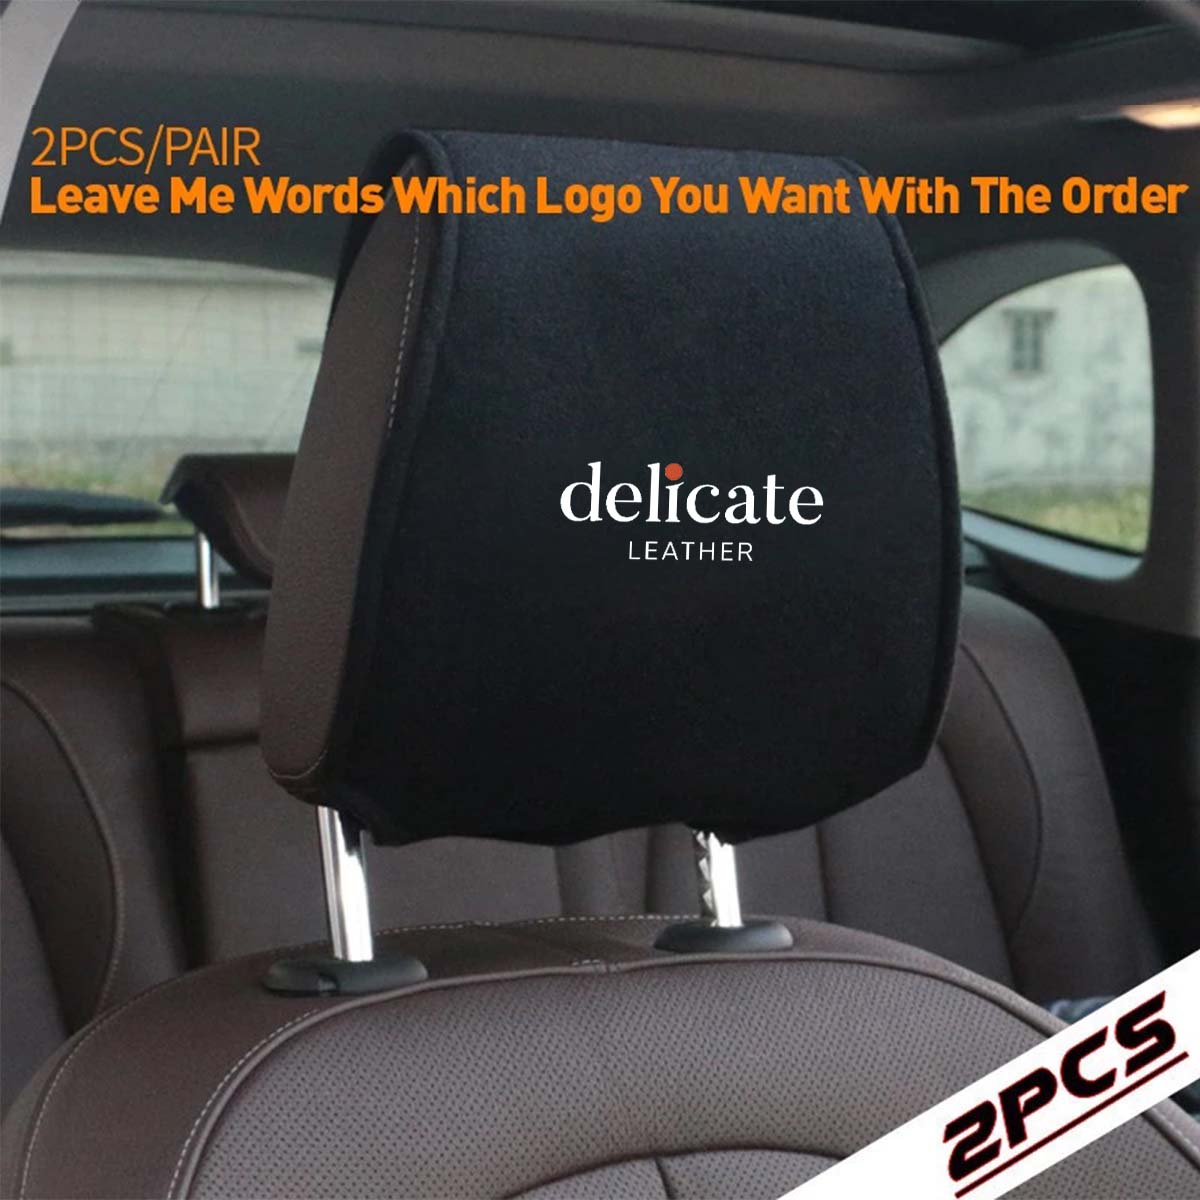 Delicate Leather Car Seat Headrest Cover Breathable Flexible Headrest Covers Velcro Auto Headrest Covers Universal Fit, Custom For Your Cars, Car Accessories CA13998 - Delicate Leather